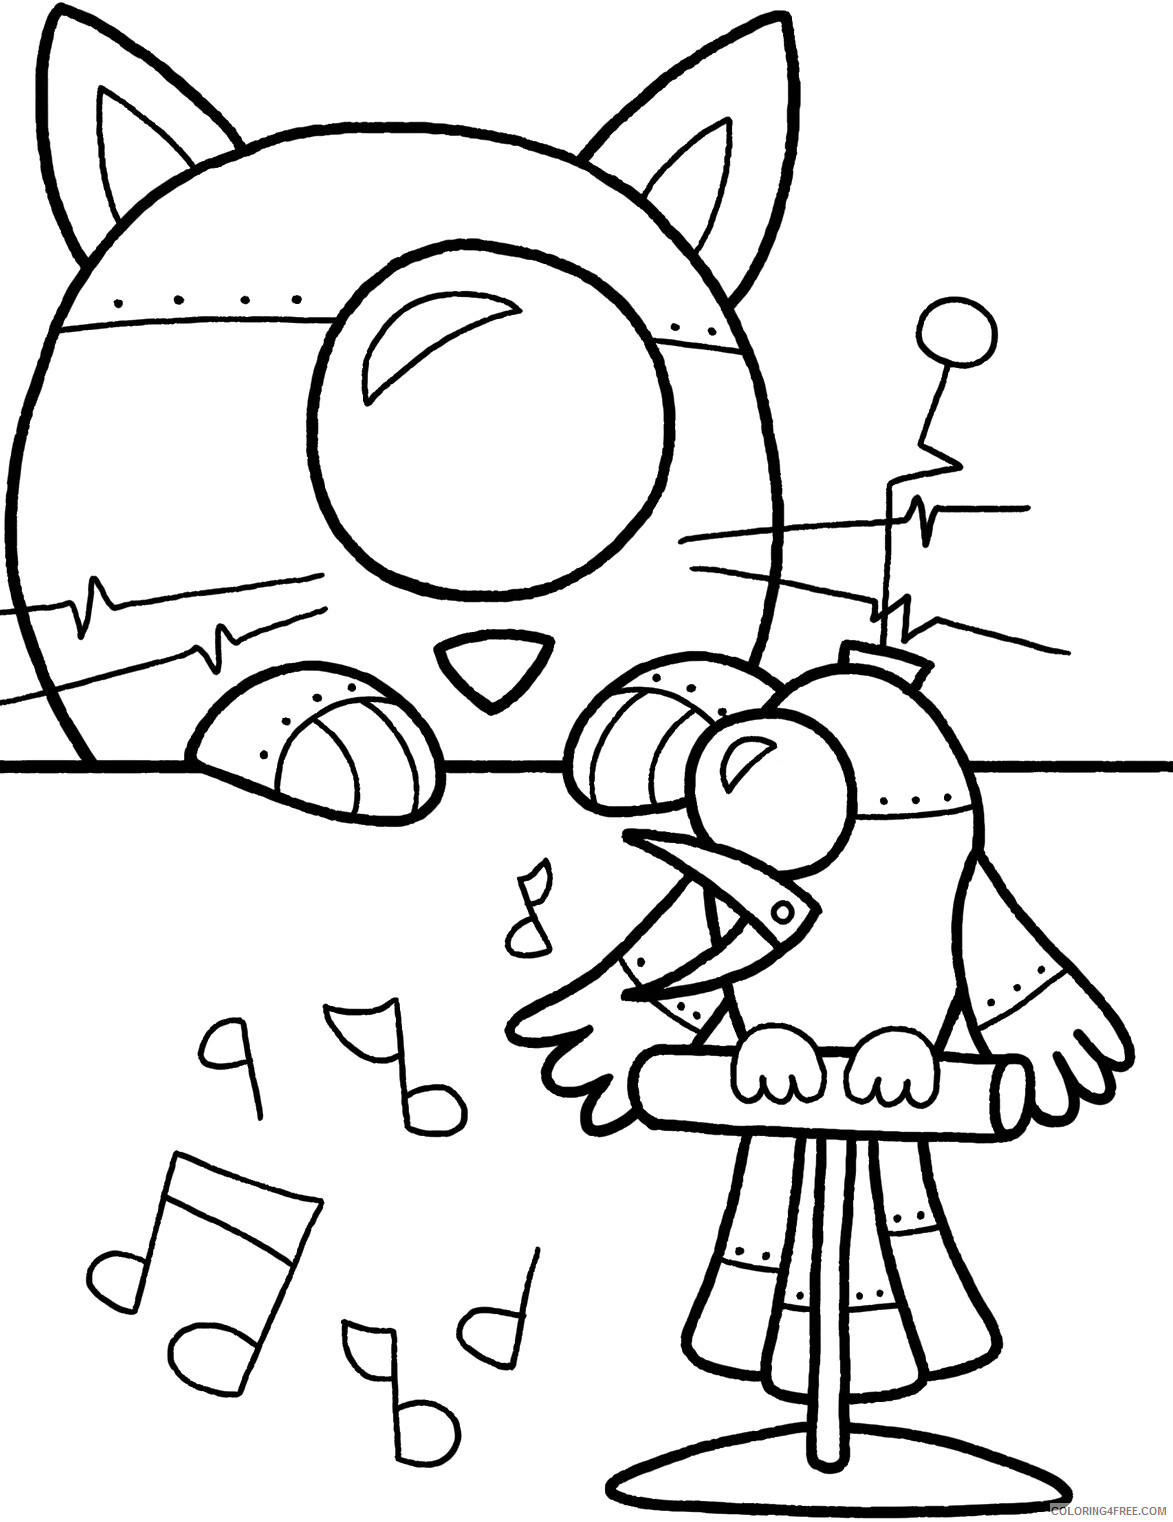 Robots Coloring Pages for boys 1548497004_robot robot dog 1 Printable 2020 0826 Coloring4free